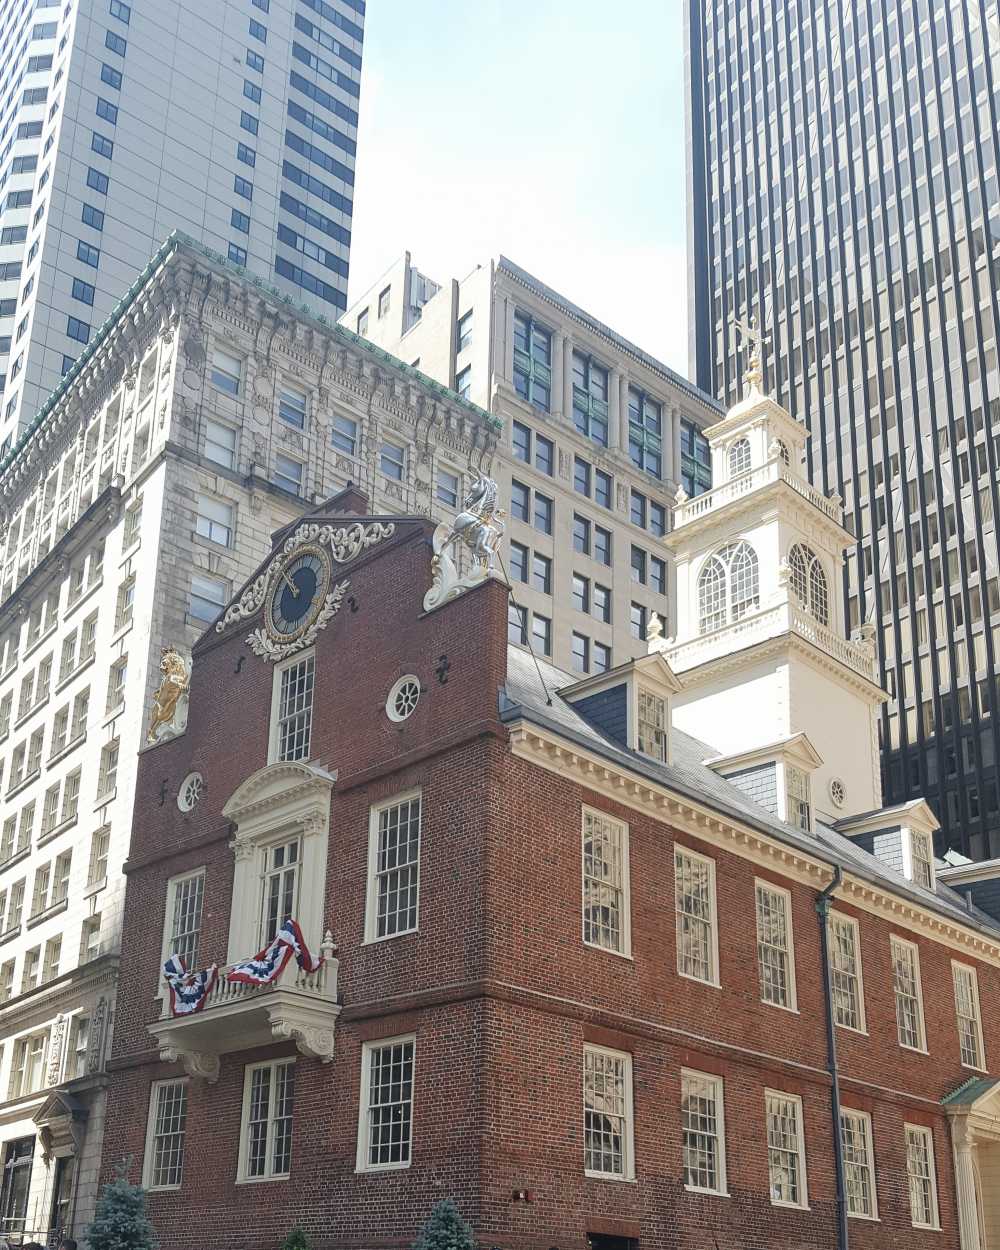 Exterior of the Old State House in Boston